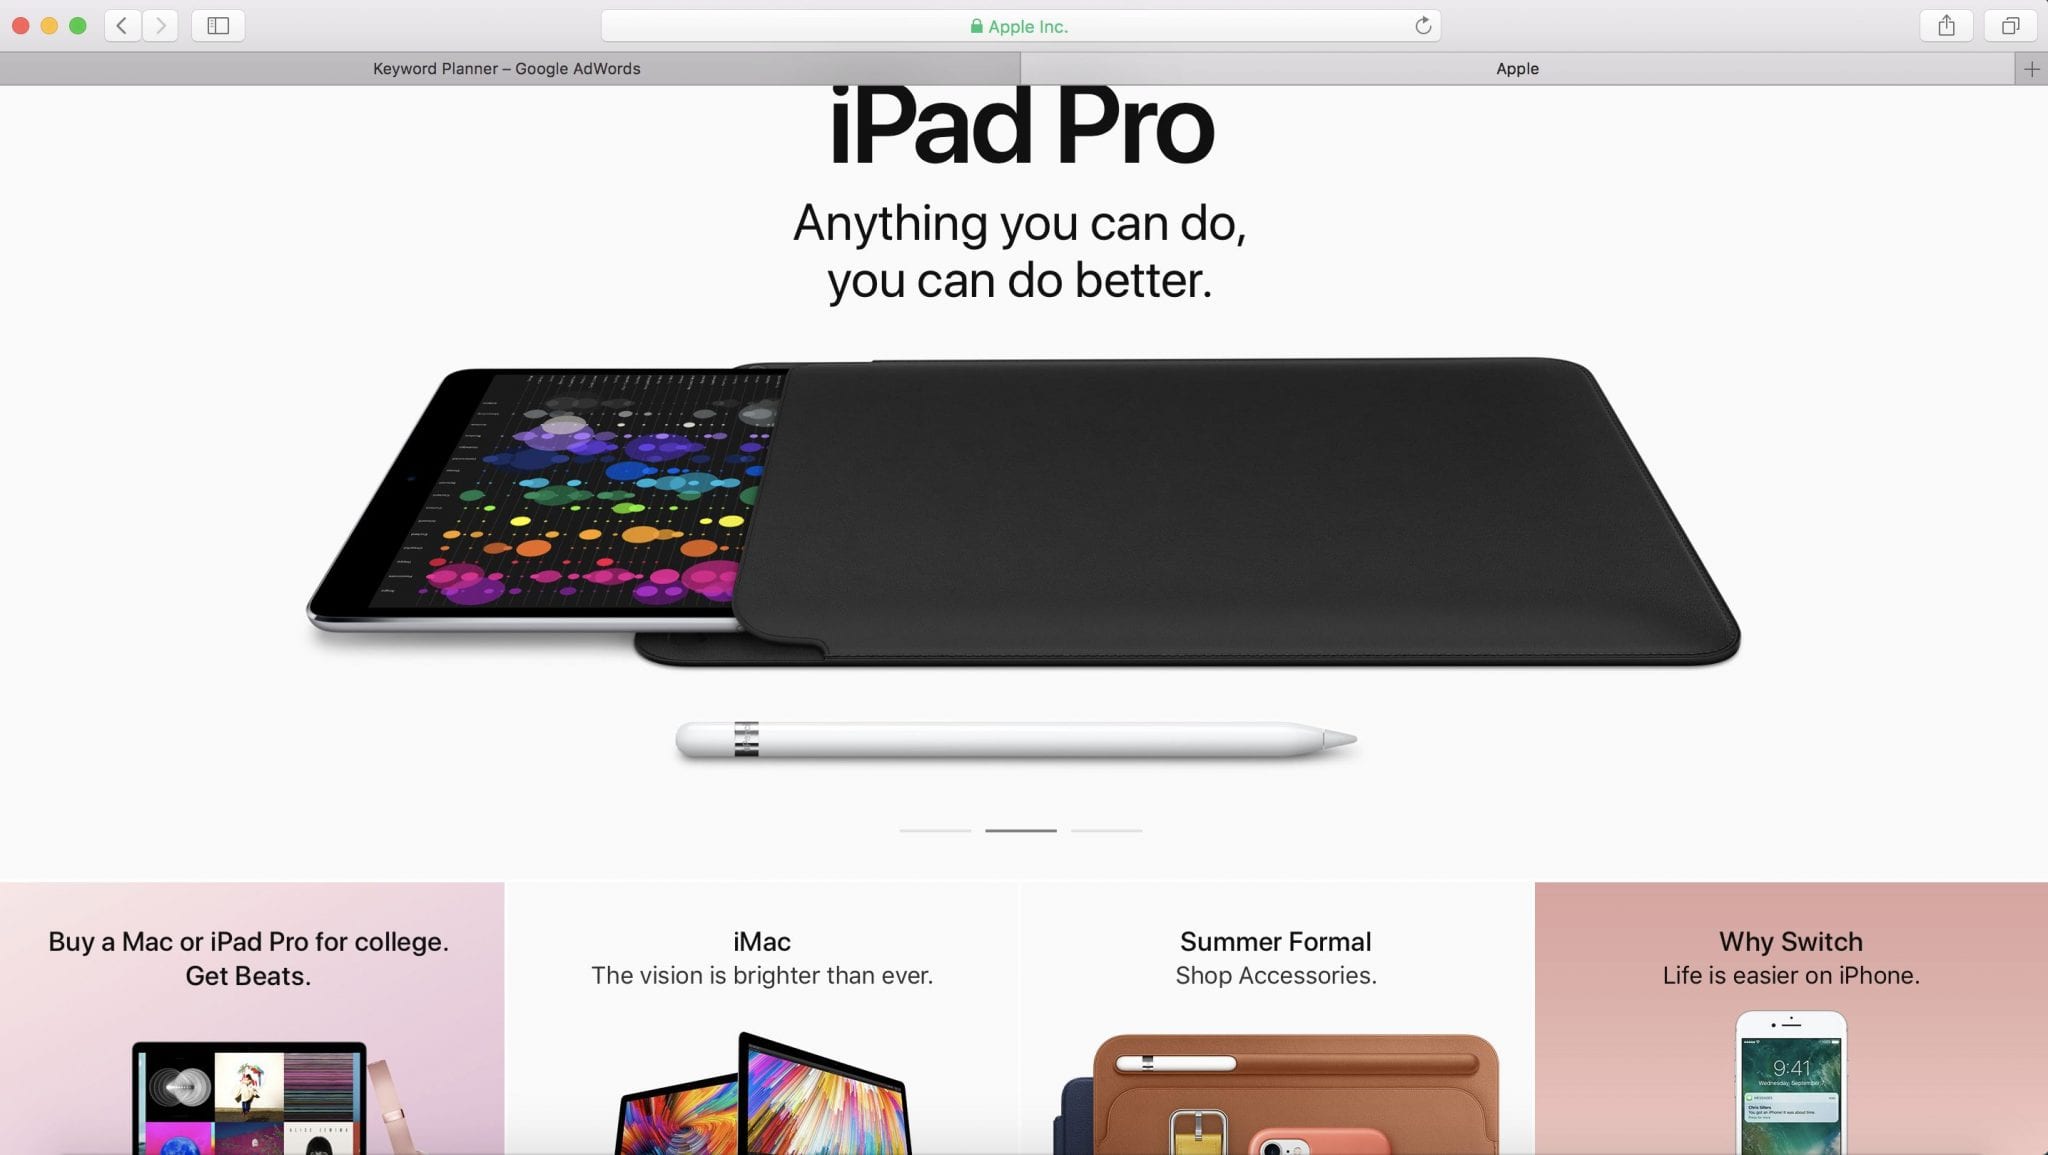 Apple has used white spaces effectively for its website and has worked a lot on improving its content marketing strategy